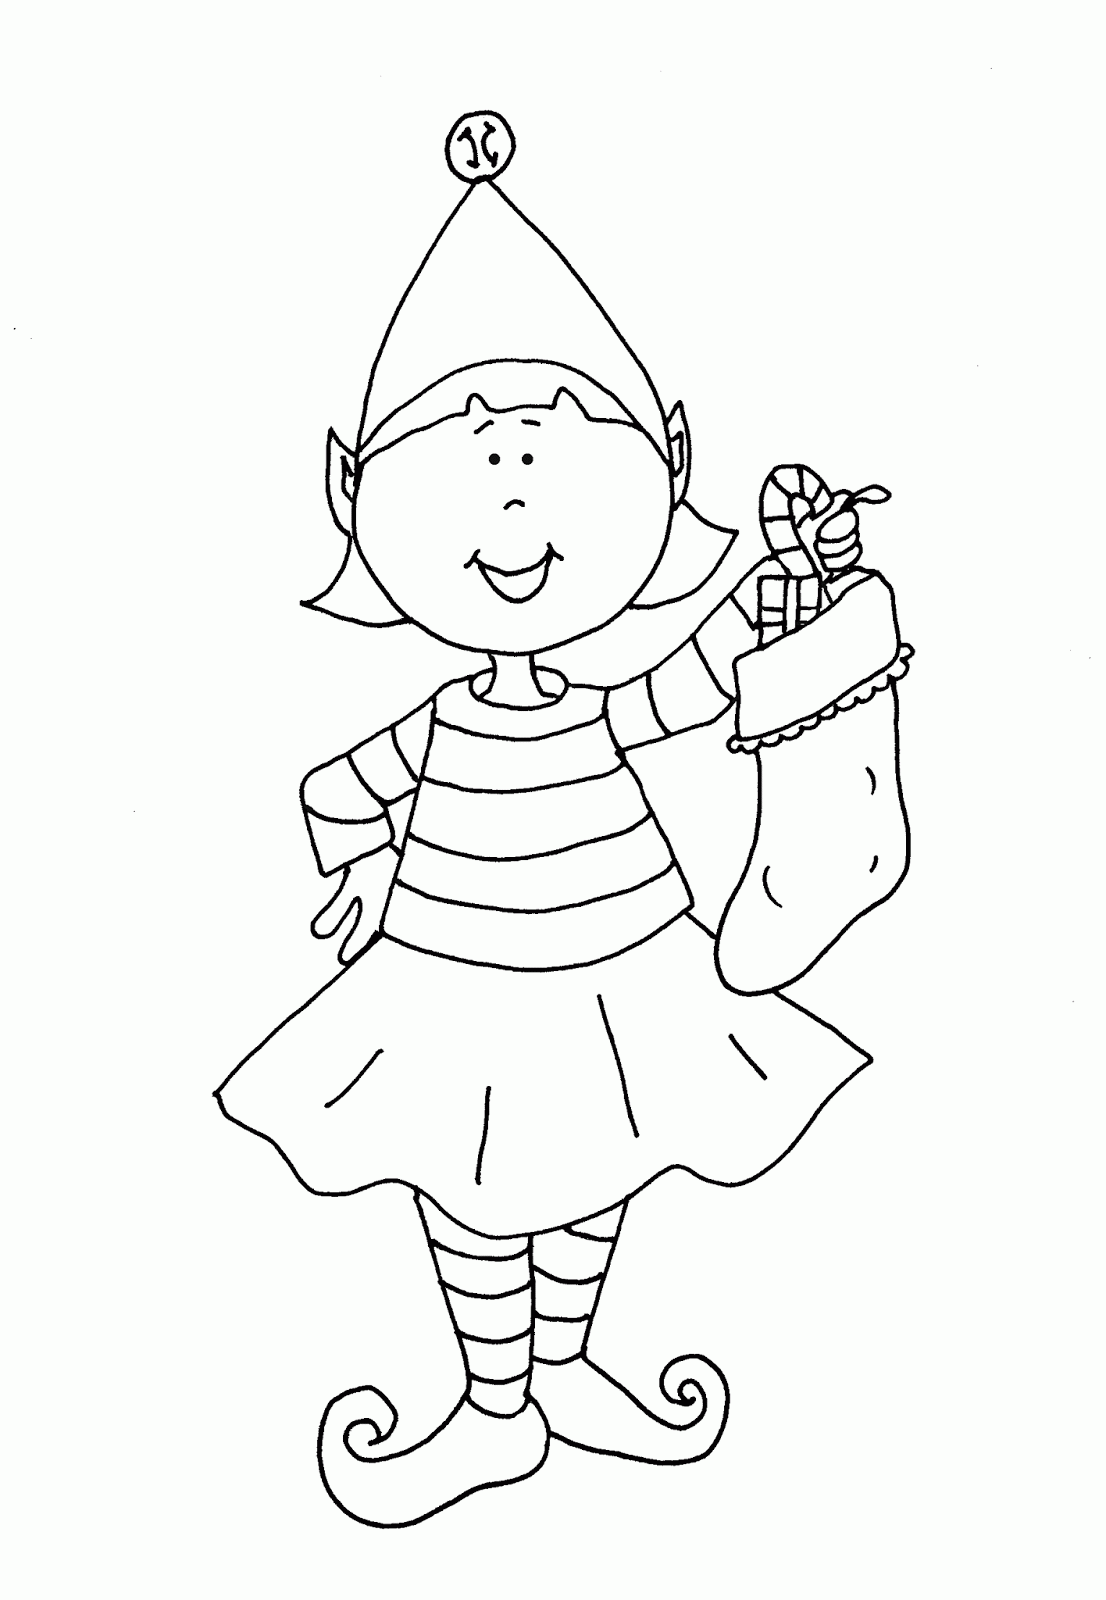 Female Christmas Elf Coloring Pages - High Quality Coloring Pages